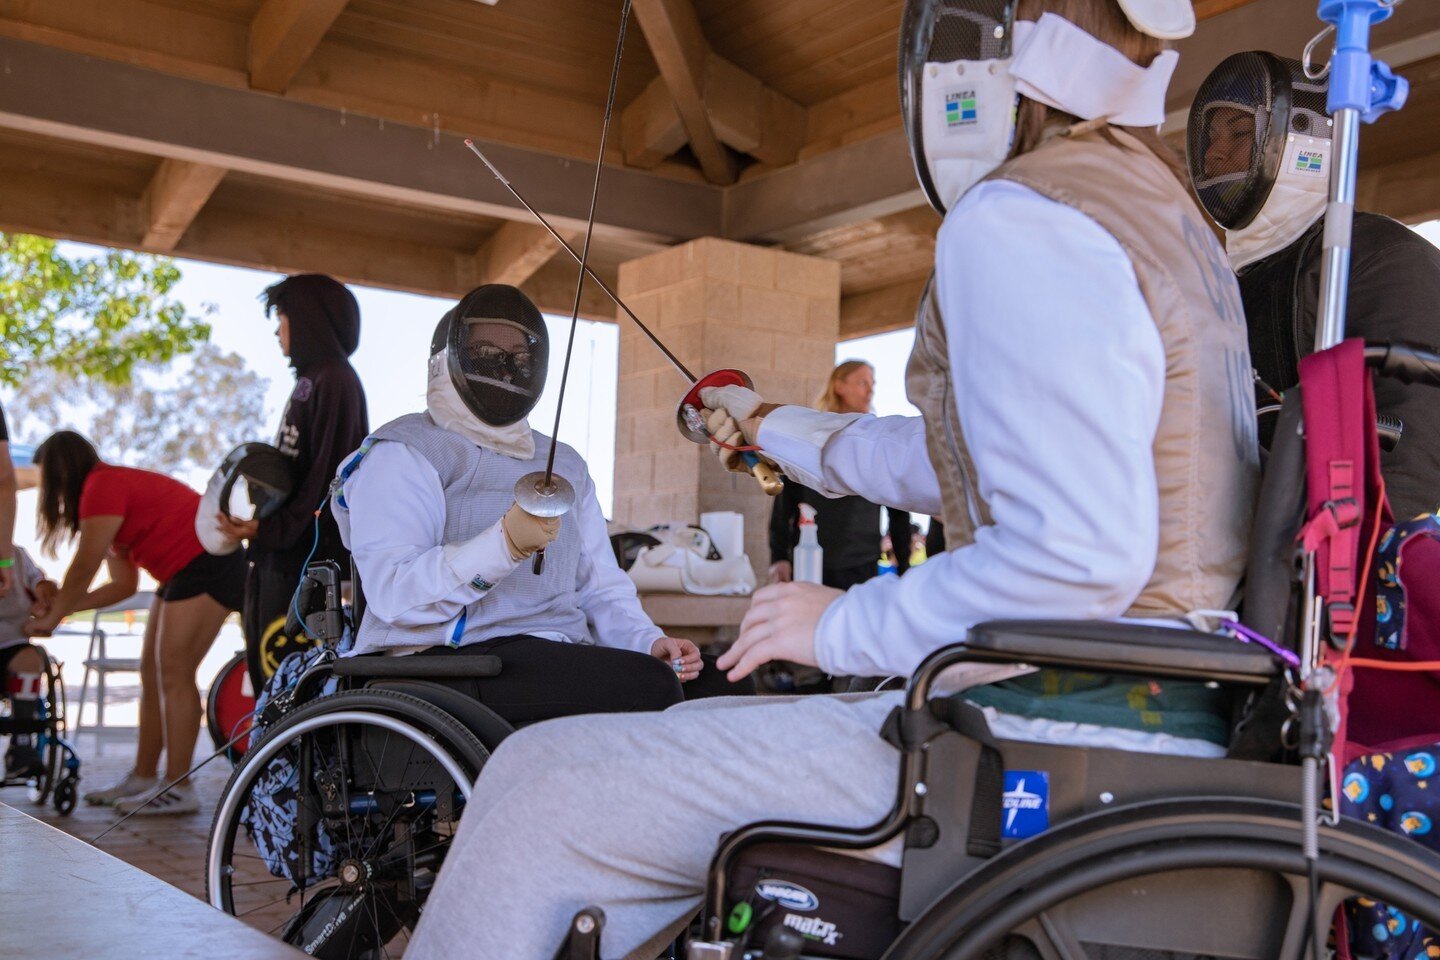 Nearly 30 people came by to experience fencing with us at the Wheelchair Sports Festival hosted by @triumphfoundation! Swordplay LA teamed up with Coach Geoff from the @unitedfencingacademy alongside olympic fencer and medalist Kamila Gafurzianova to